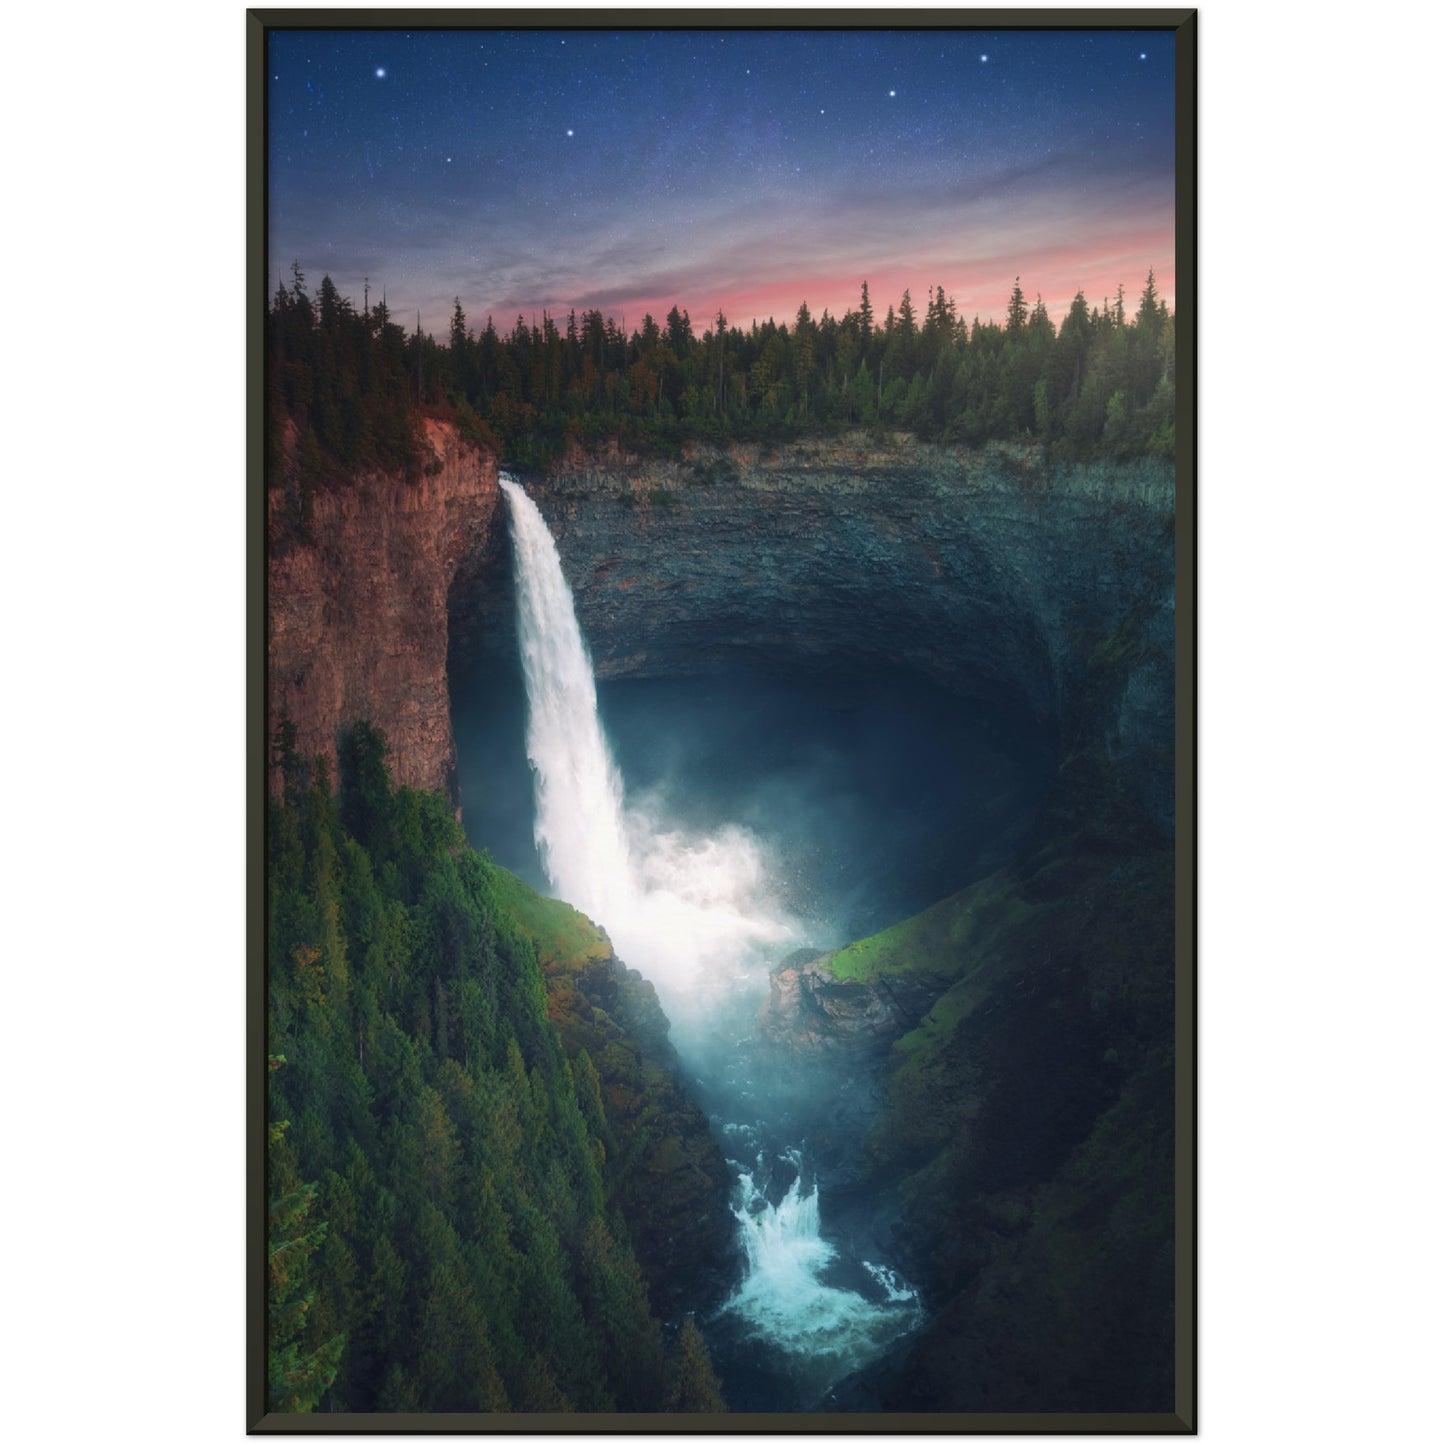 Galactic Waterfall - Museum-Quality Matte Paper Metal Framed Poster